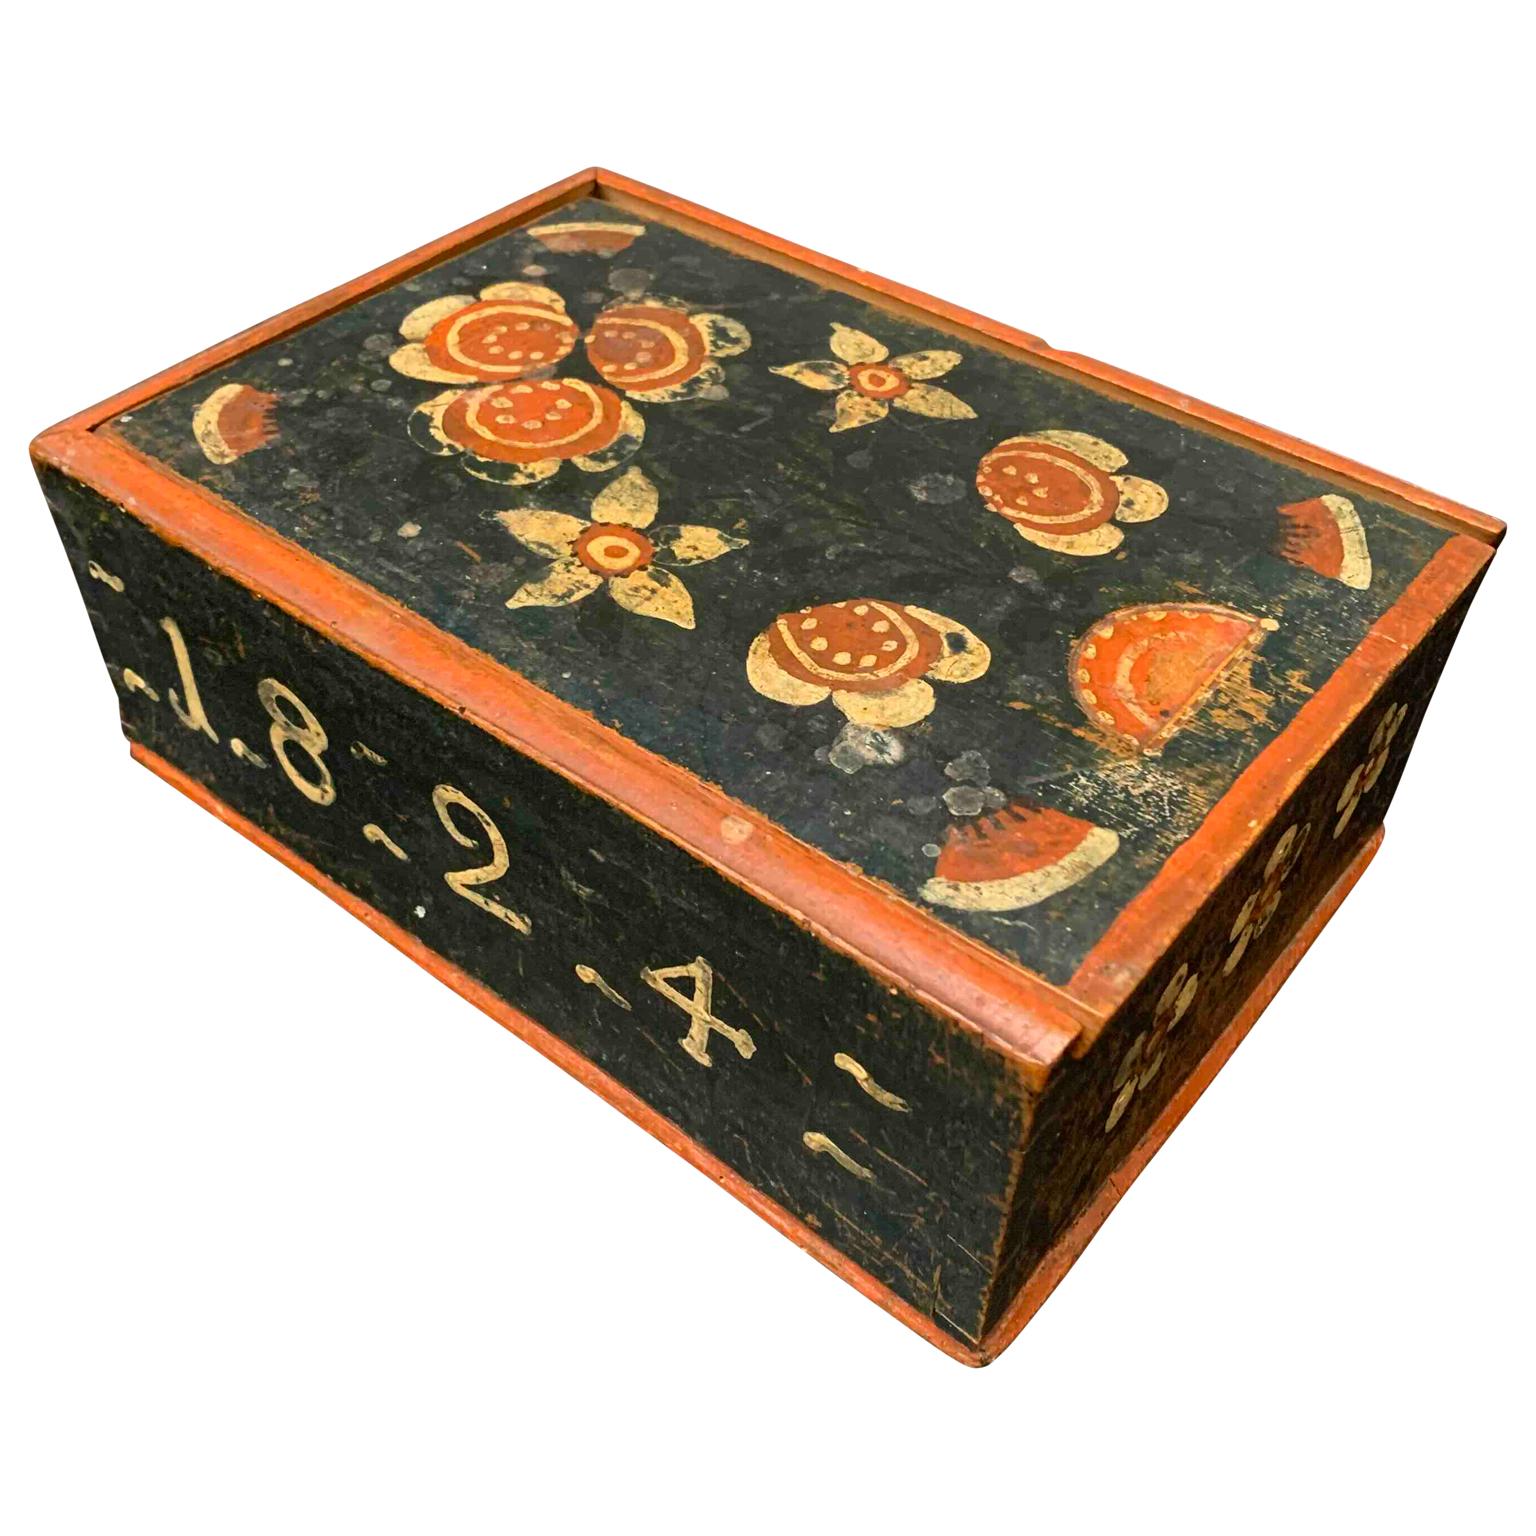 Swedish 19th century wooden monogrammed and dated Folk Art box, dated 1824.

An original painted box in dark blue and black color with flower decoration.
Belonged to a woman (the 